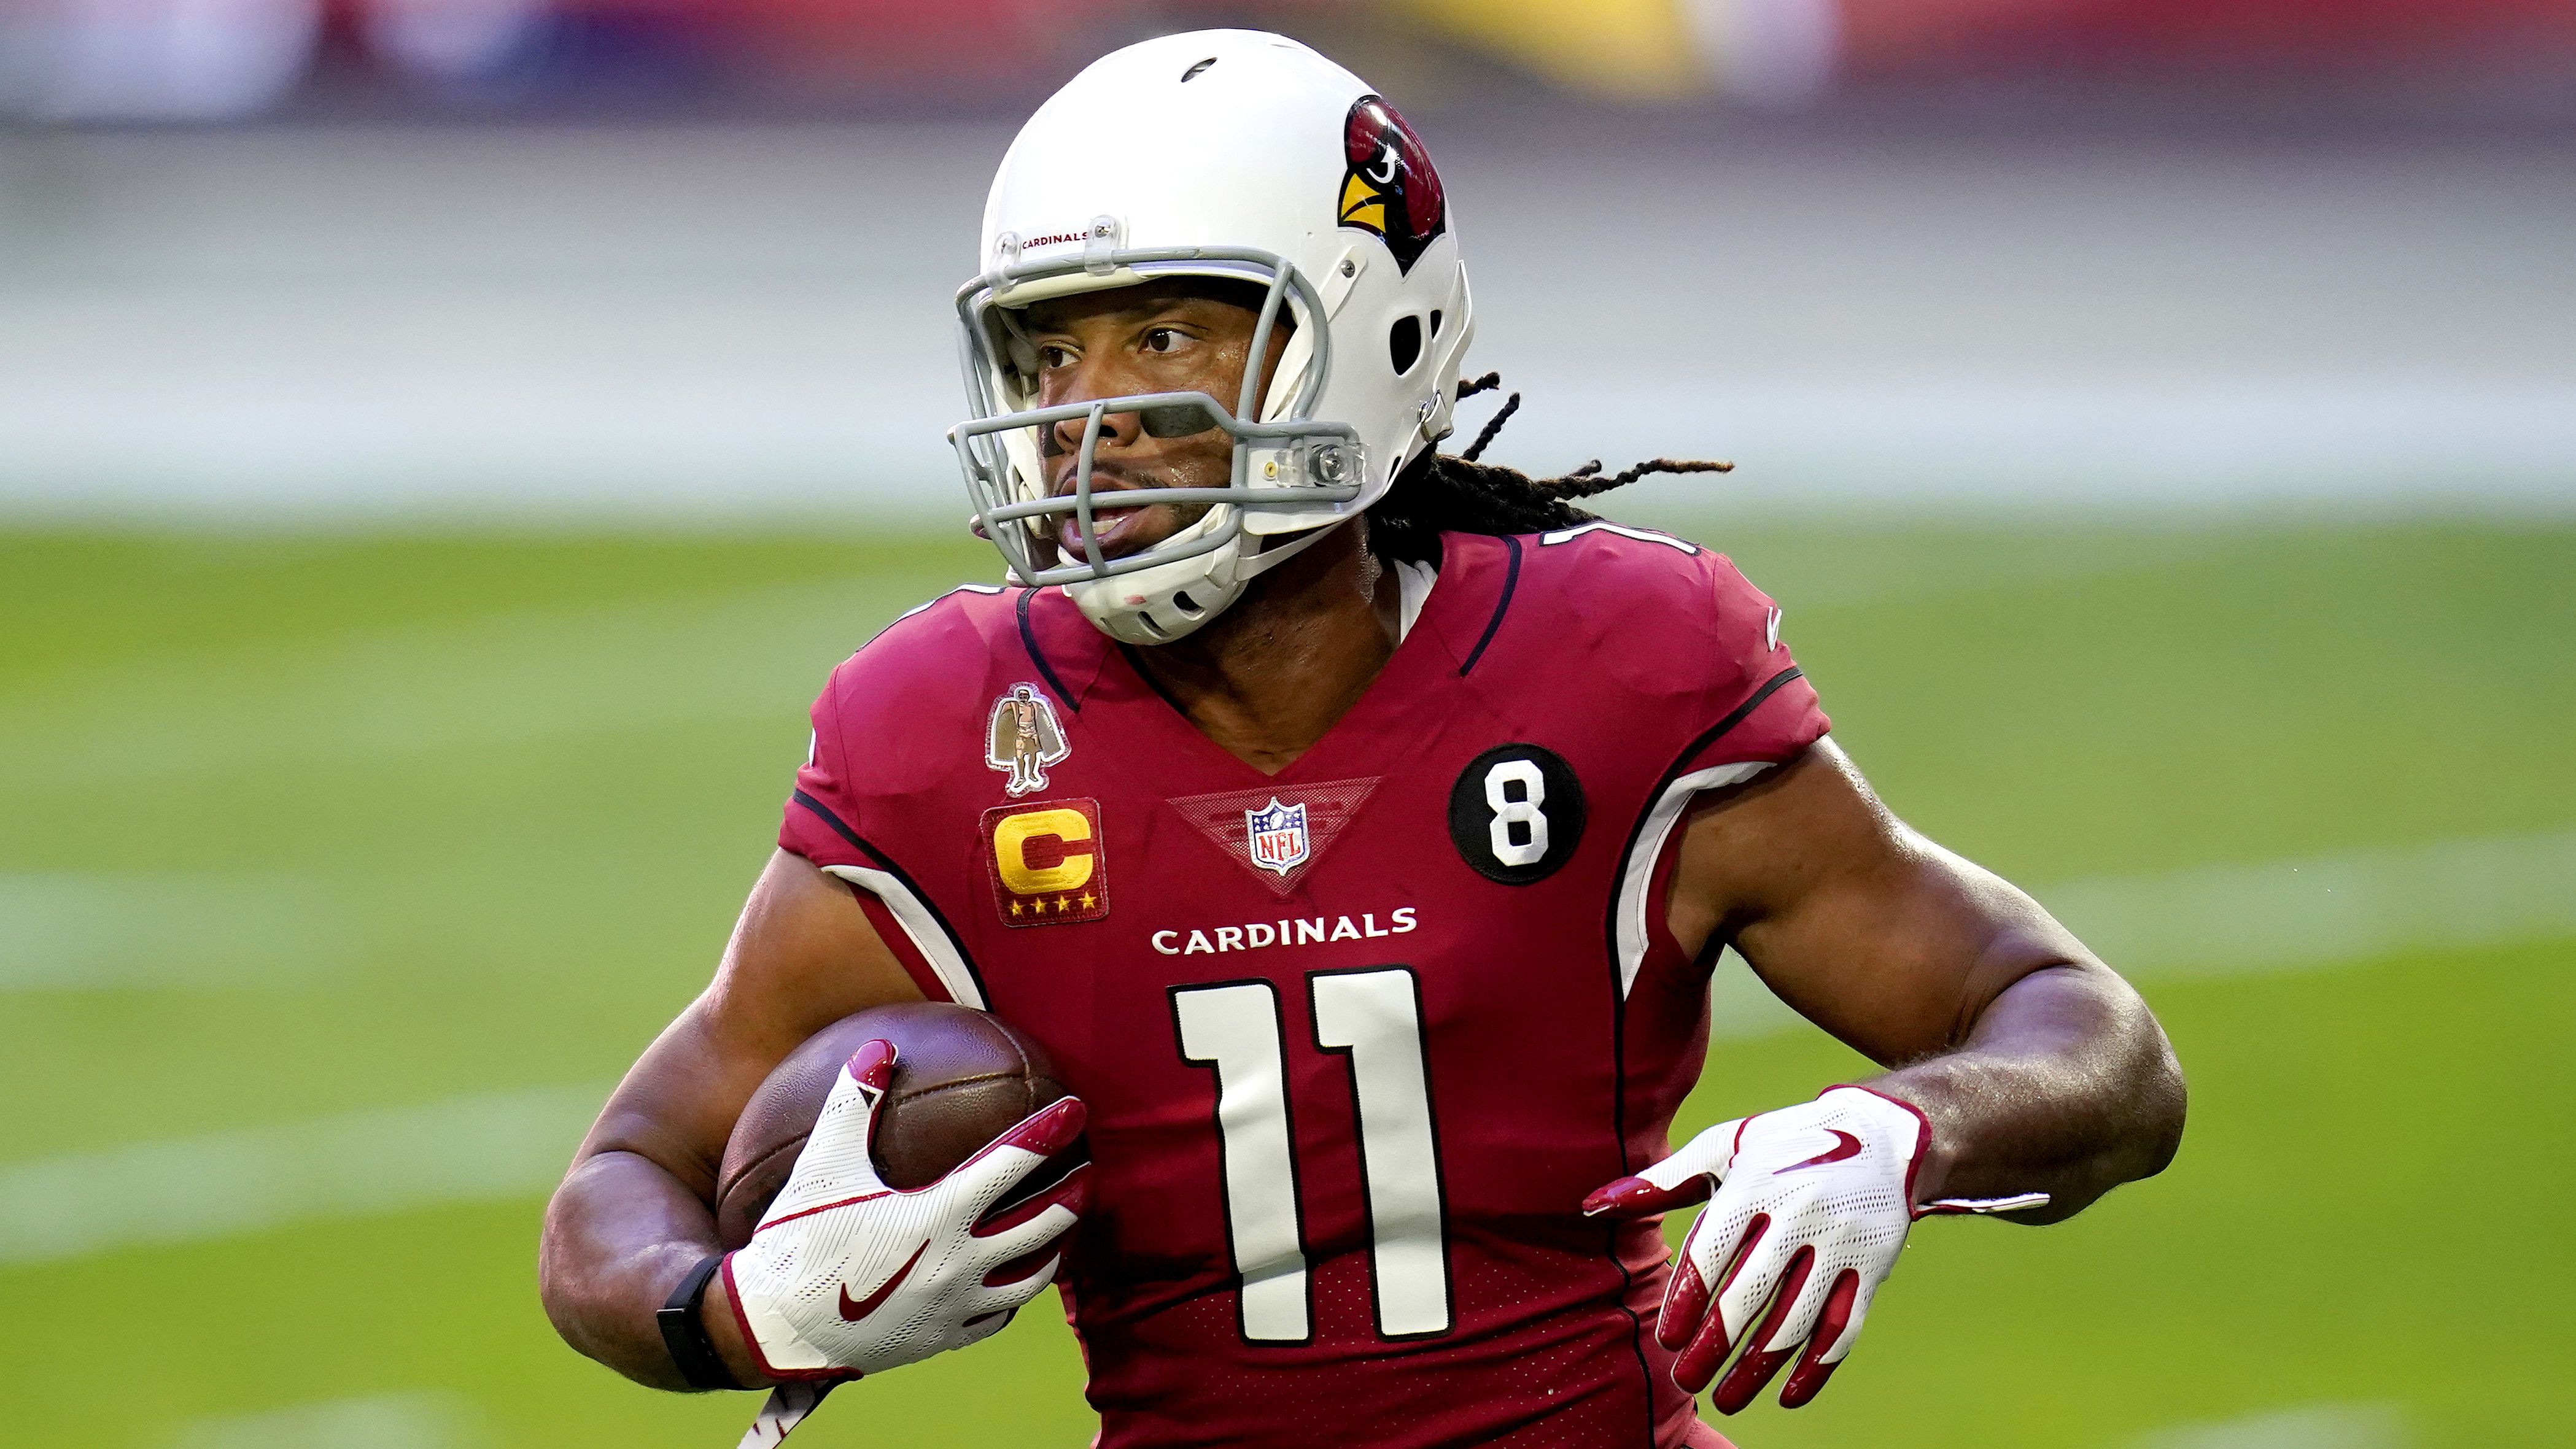 Larry Fitzgerald Gets His College Degree